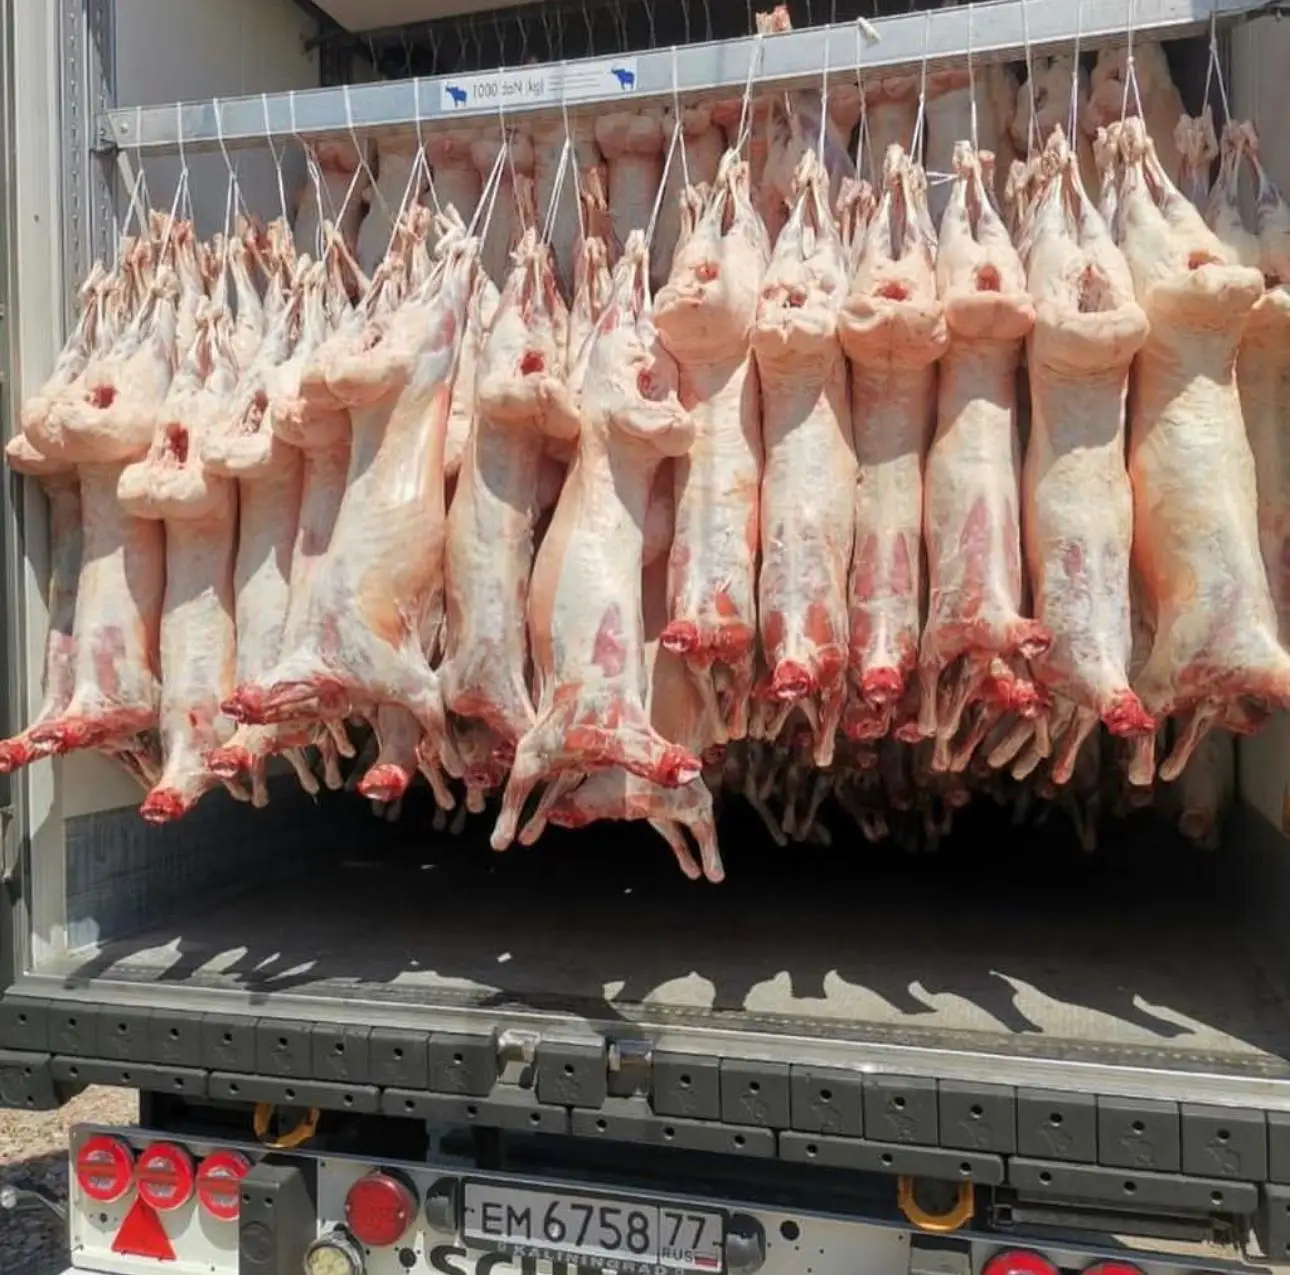 Cleaned Frozen Lamb Tail Fat Lamb Tail Fat for sale  Frozen Lamb Tail Fat  Halal Lamb Tail Fat